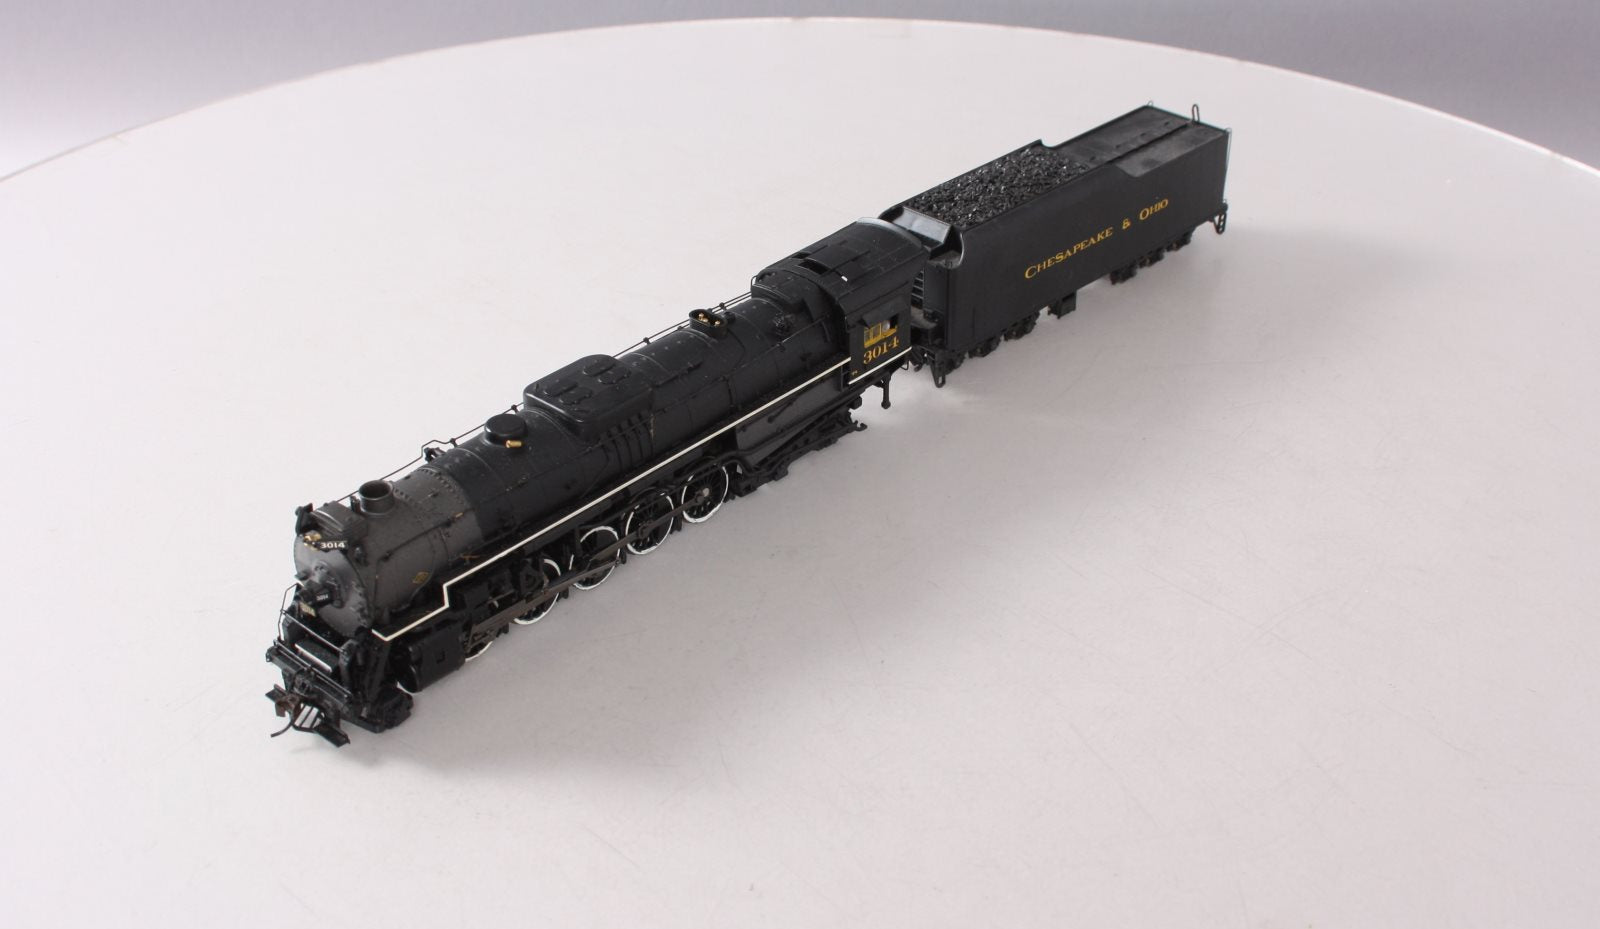 Broadway Limited 2312 HO C&O Class T-1 2-10-4 Steam Locomotive Paragon2™ #3014